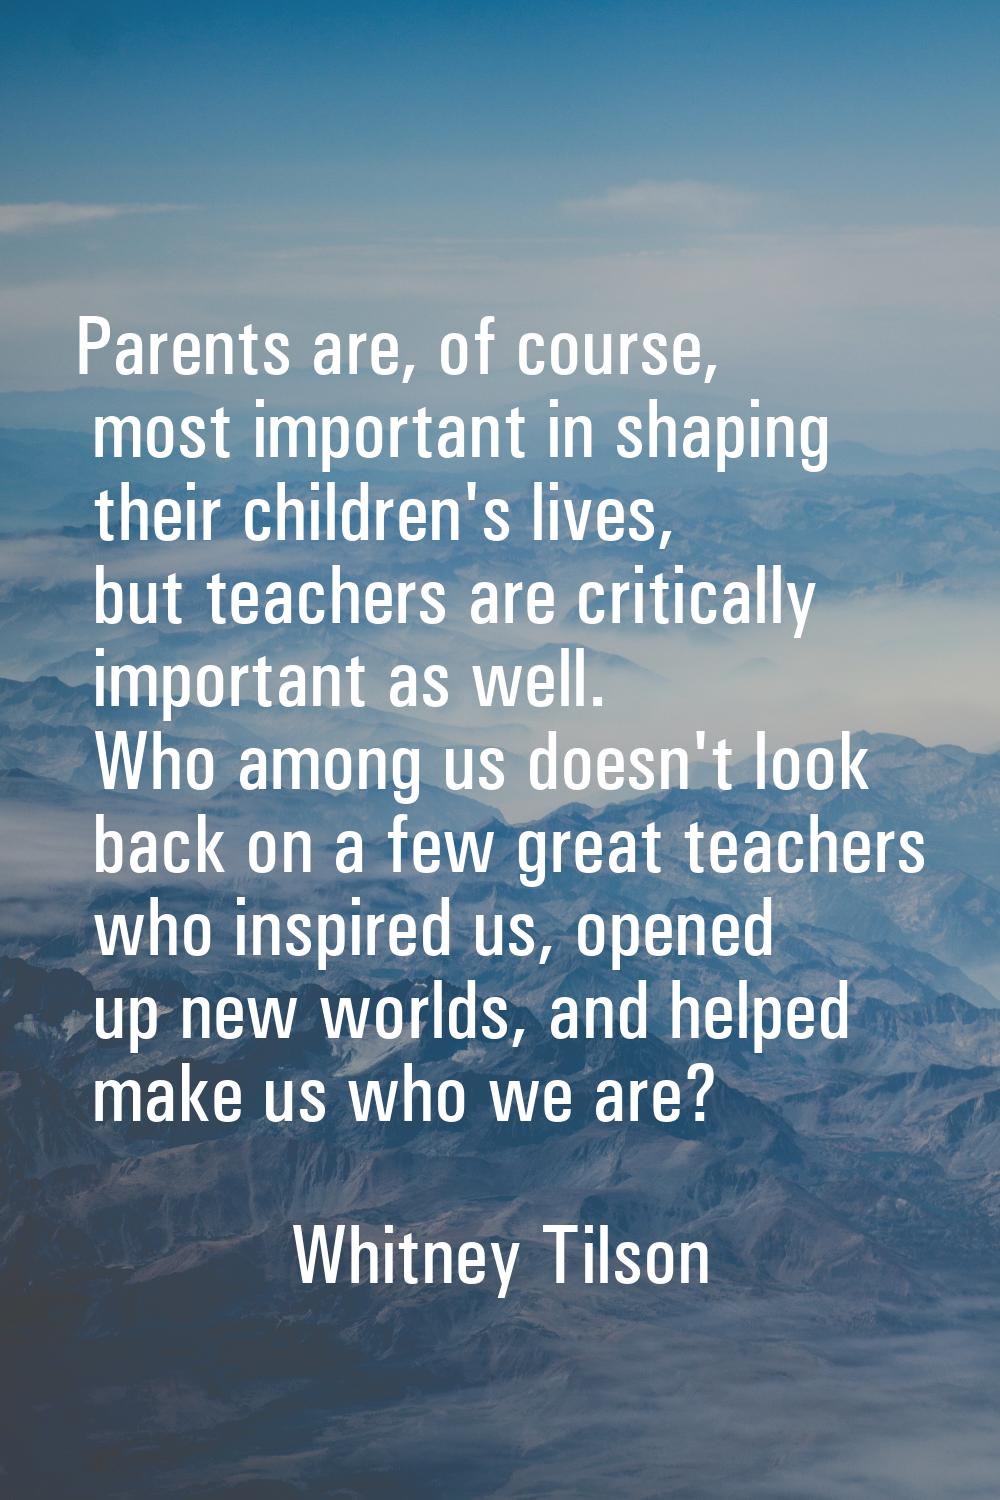 Parents are, of course, most important in shaping their children's lives, but teachers are critical